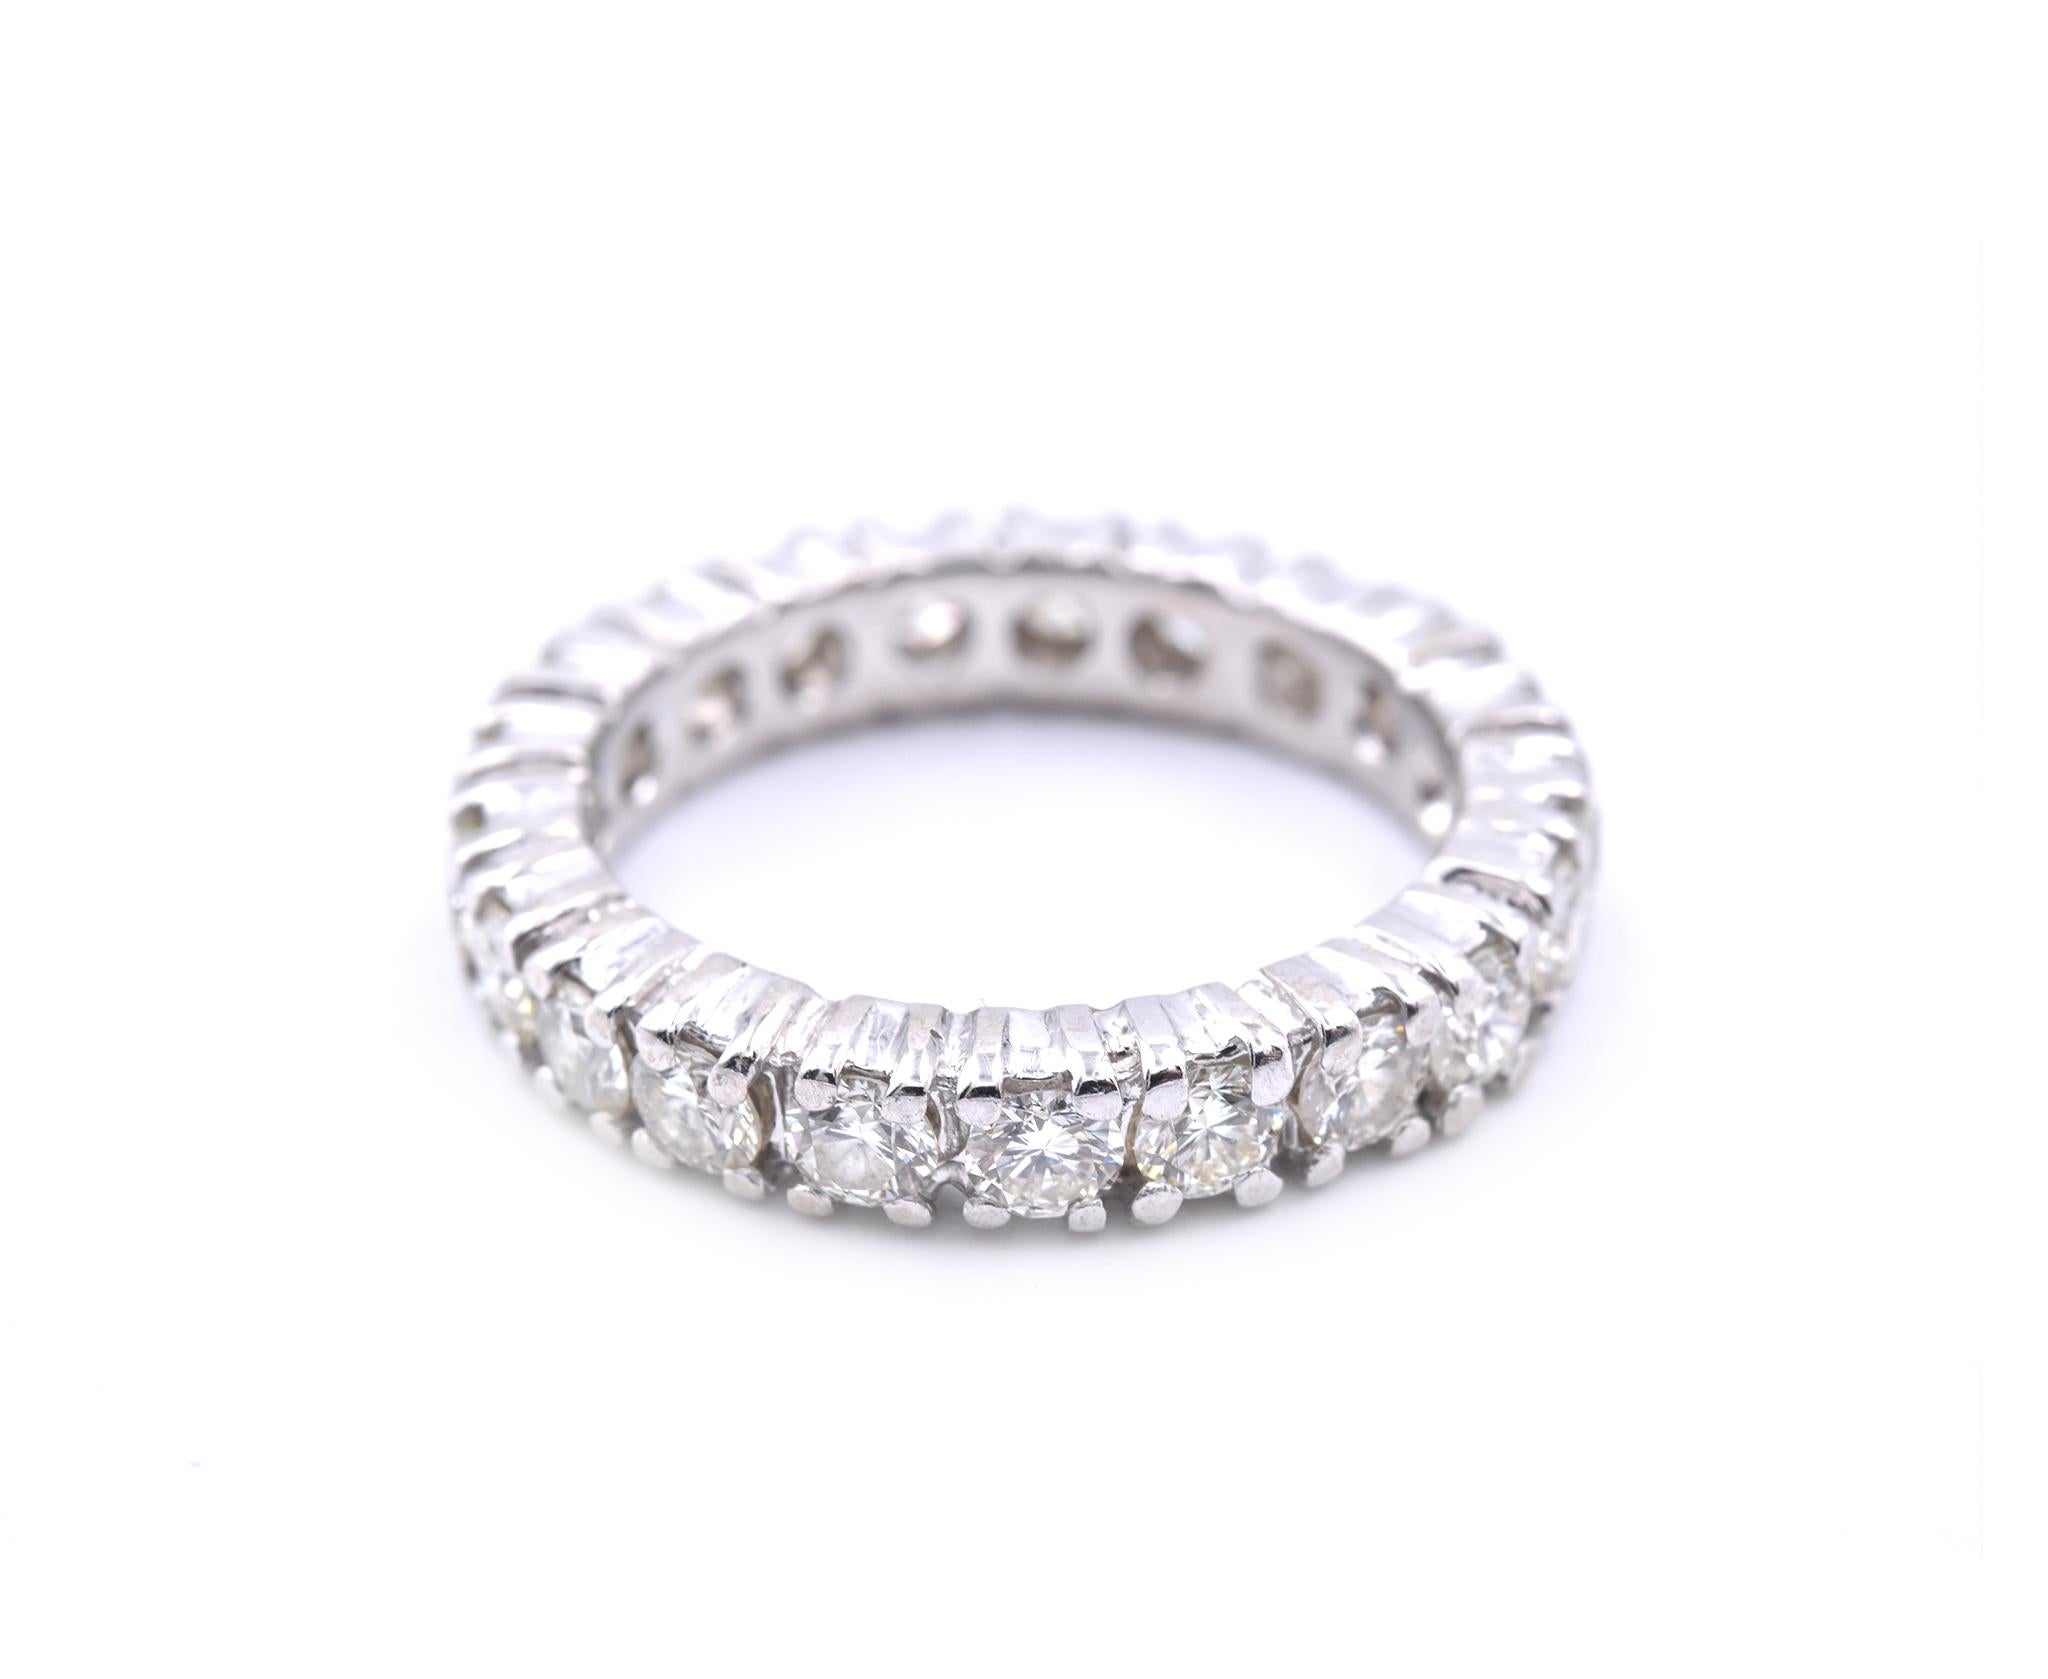 Material: 14k white gold
Diamonds: 22 rounds cuts = 2.20cttw
Color: J-K
Clarity: VS
Size: 6  (please allow two additional shipping days for sizing requests)  
Dimensions: ring measures 3.57mm in width
Weight: 4.90 grams
